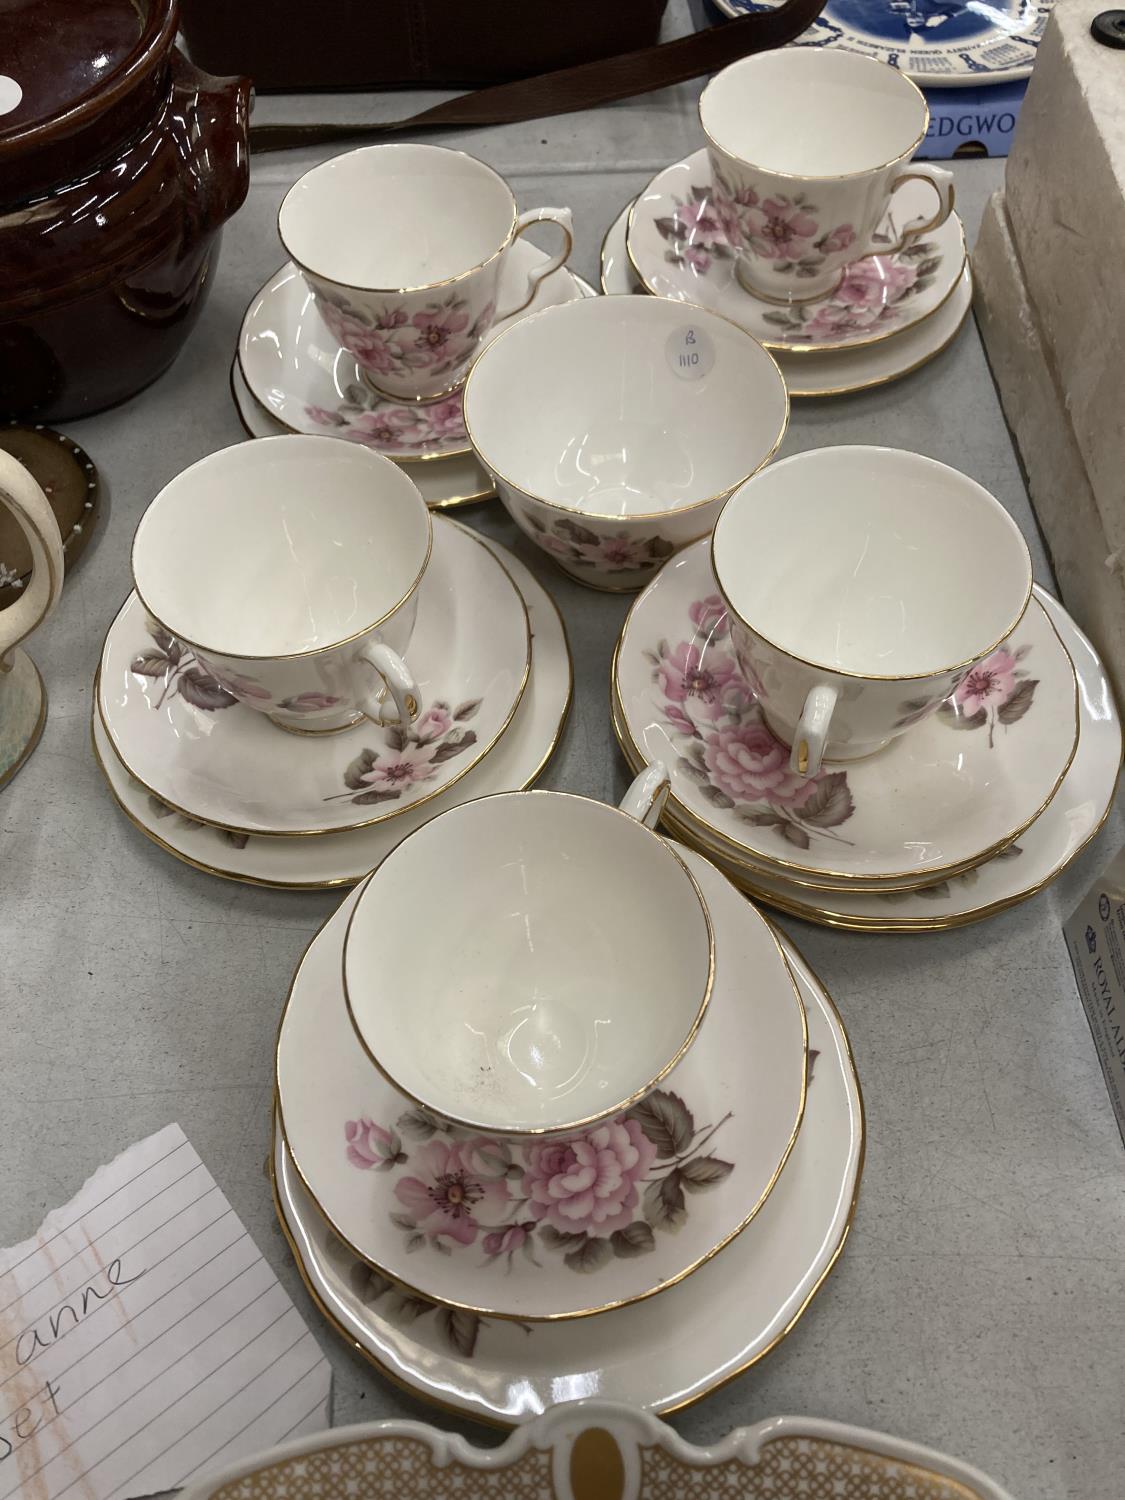 A QUEEN ANNE VINTAGE TEASET TO INCLUDE CUPS, SAUCERS, SIDE PLATES AND SUGAR BOWL PLUS A FLORA - Image 6 of 6